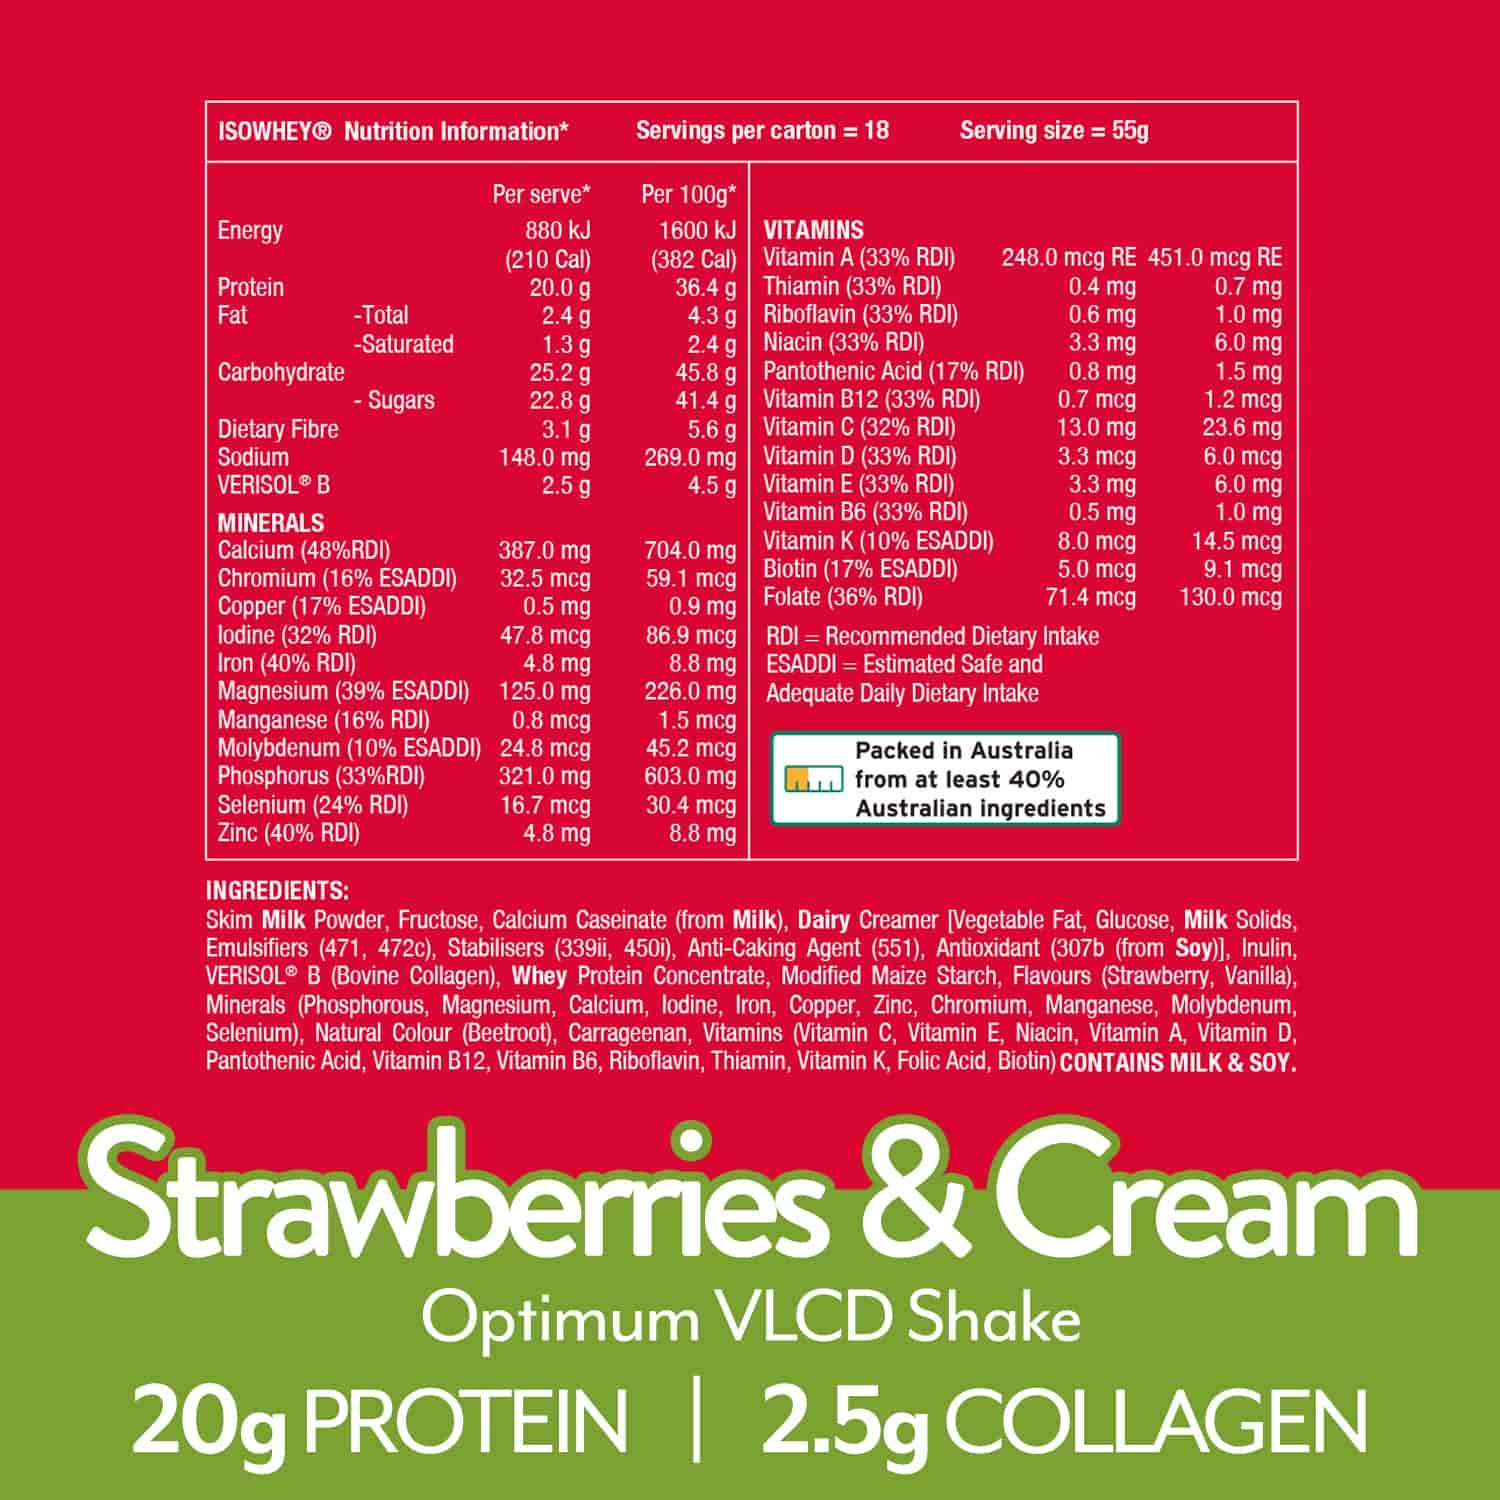 IsoWhey Optimum VLCD Ingredients and Nutritional information for rapid weight loss